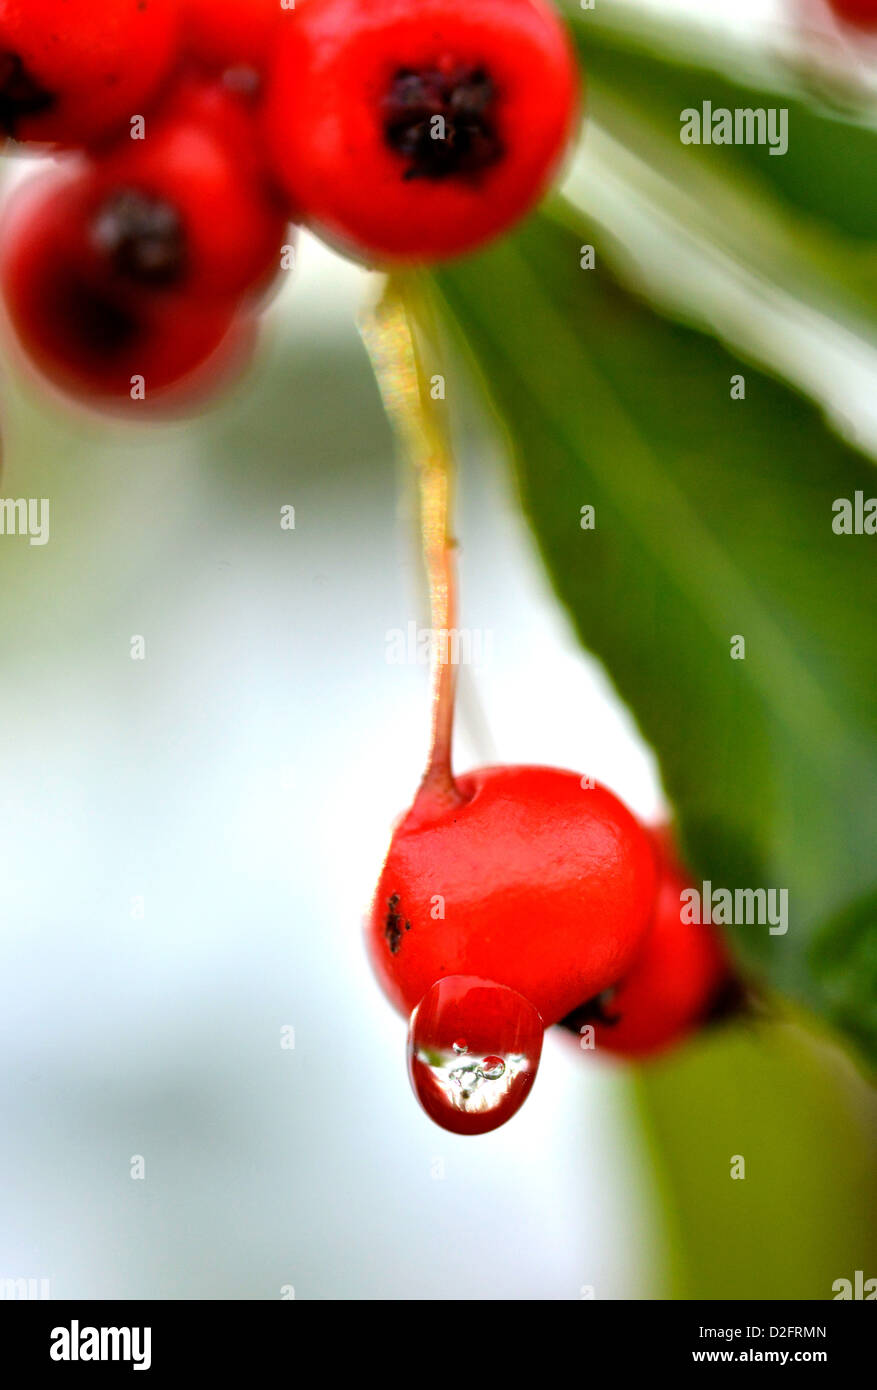 A close-up photograph of a melting ice droplet on red Cotoneaster berries. Stock Photo